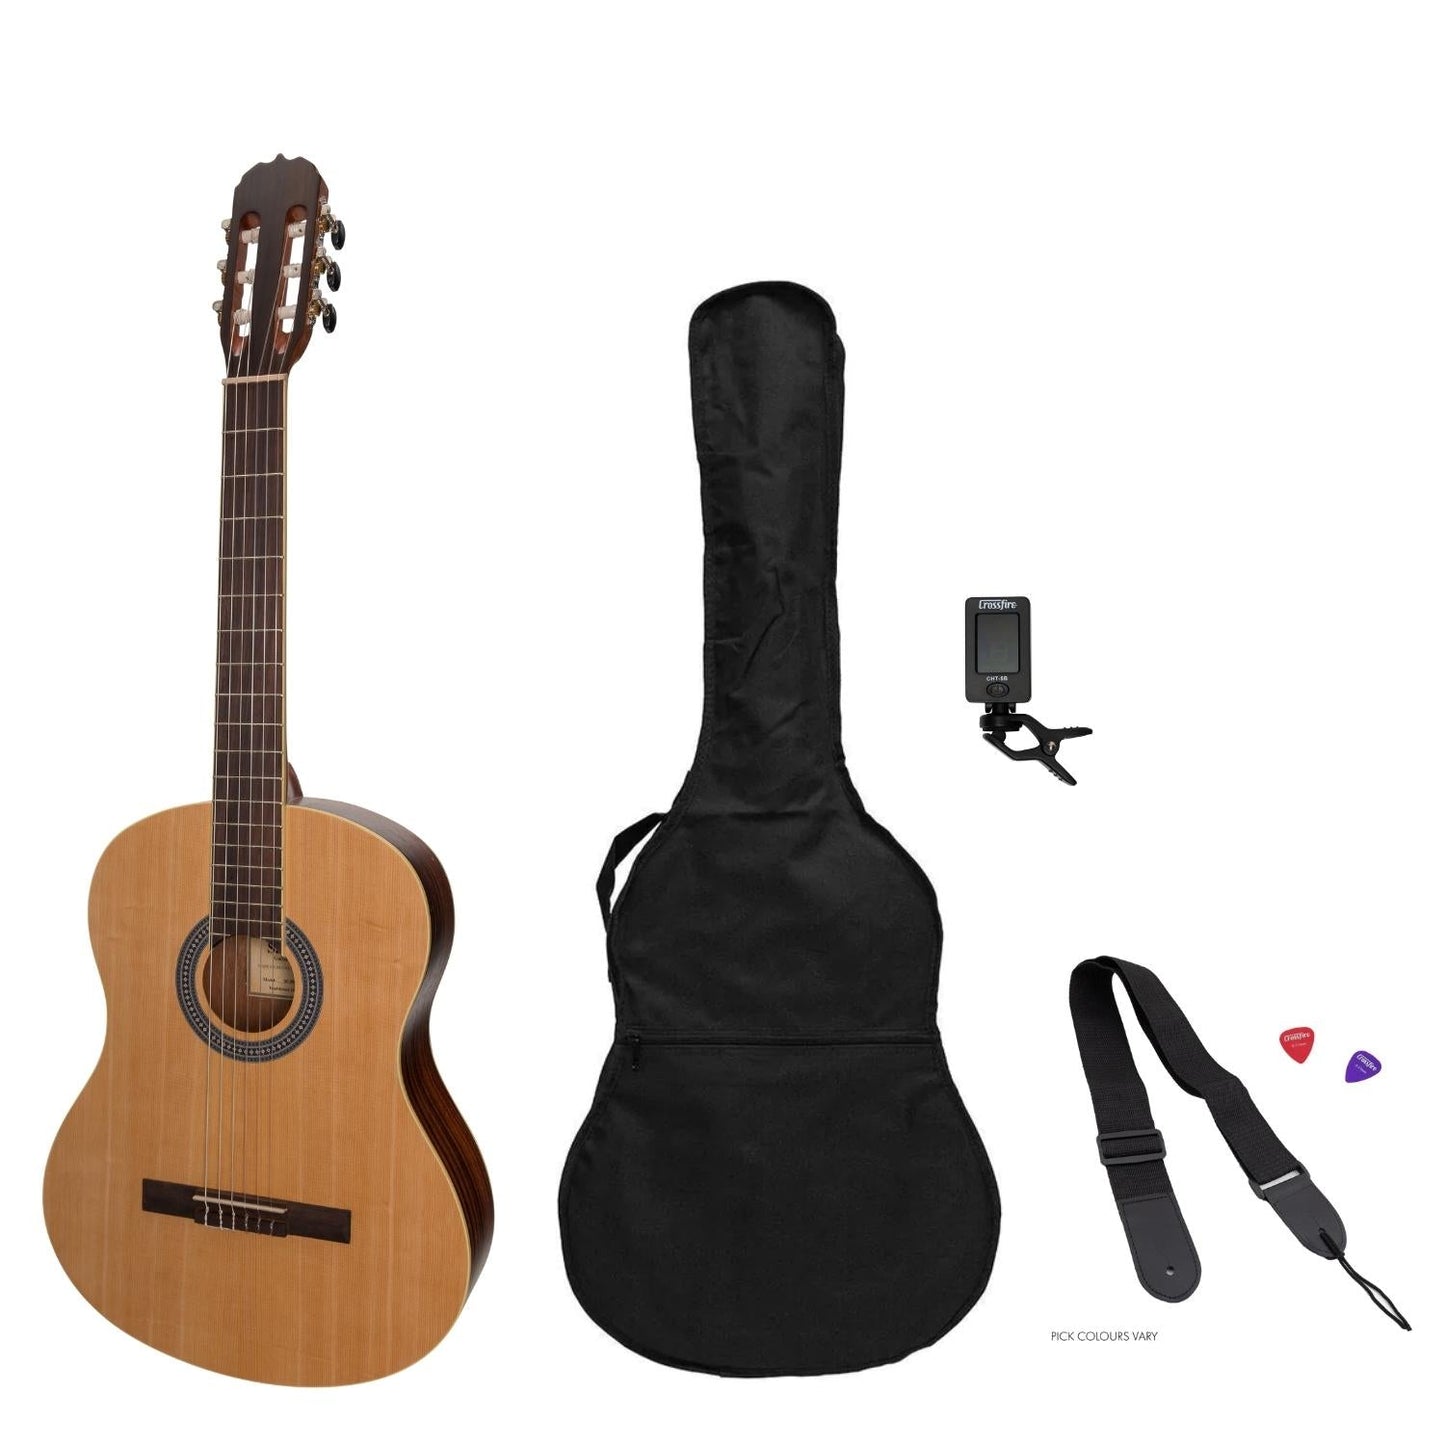 Sanchez Full-size Size Student Classical Guitar Pack (Spruce/Rosewood)